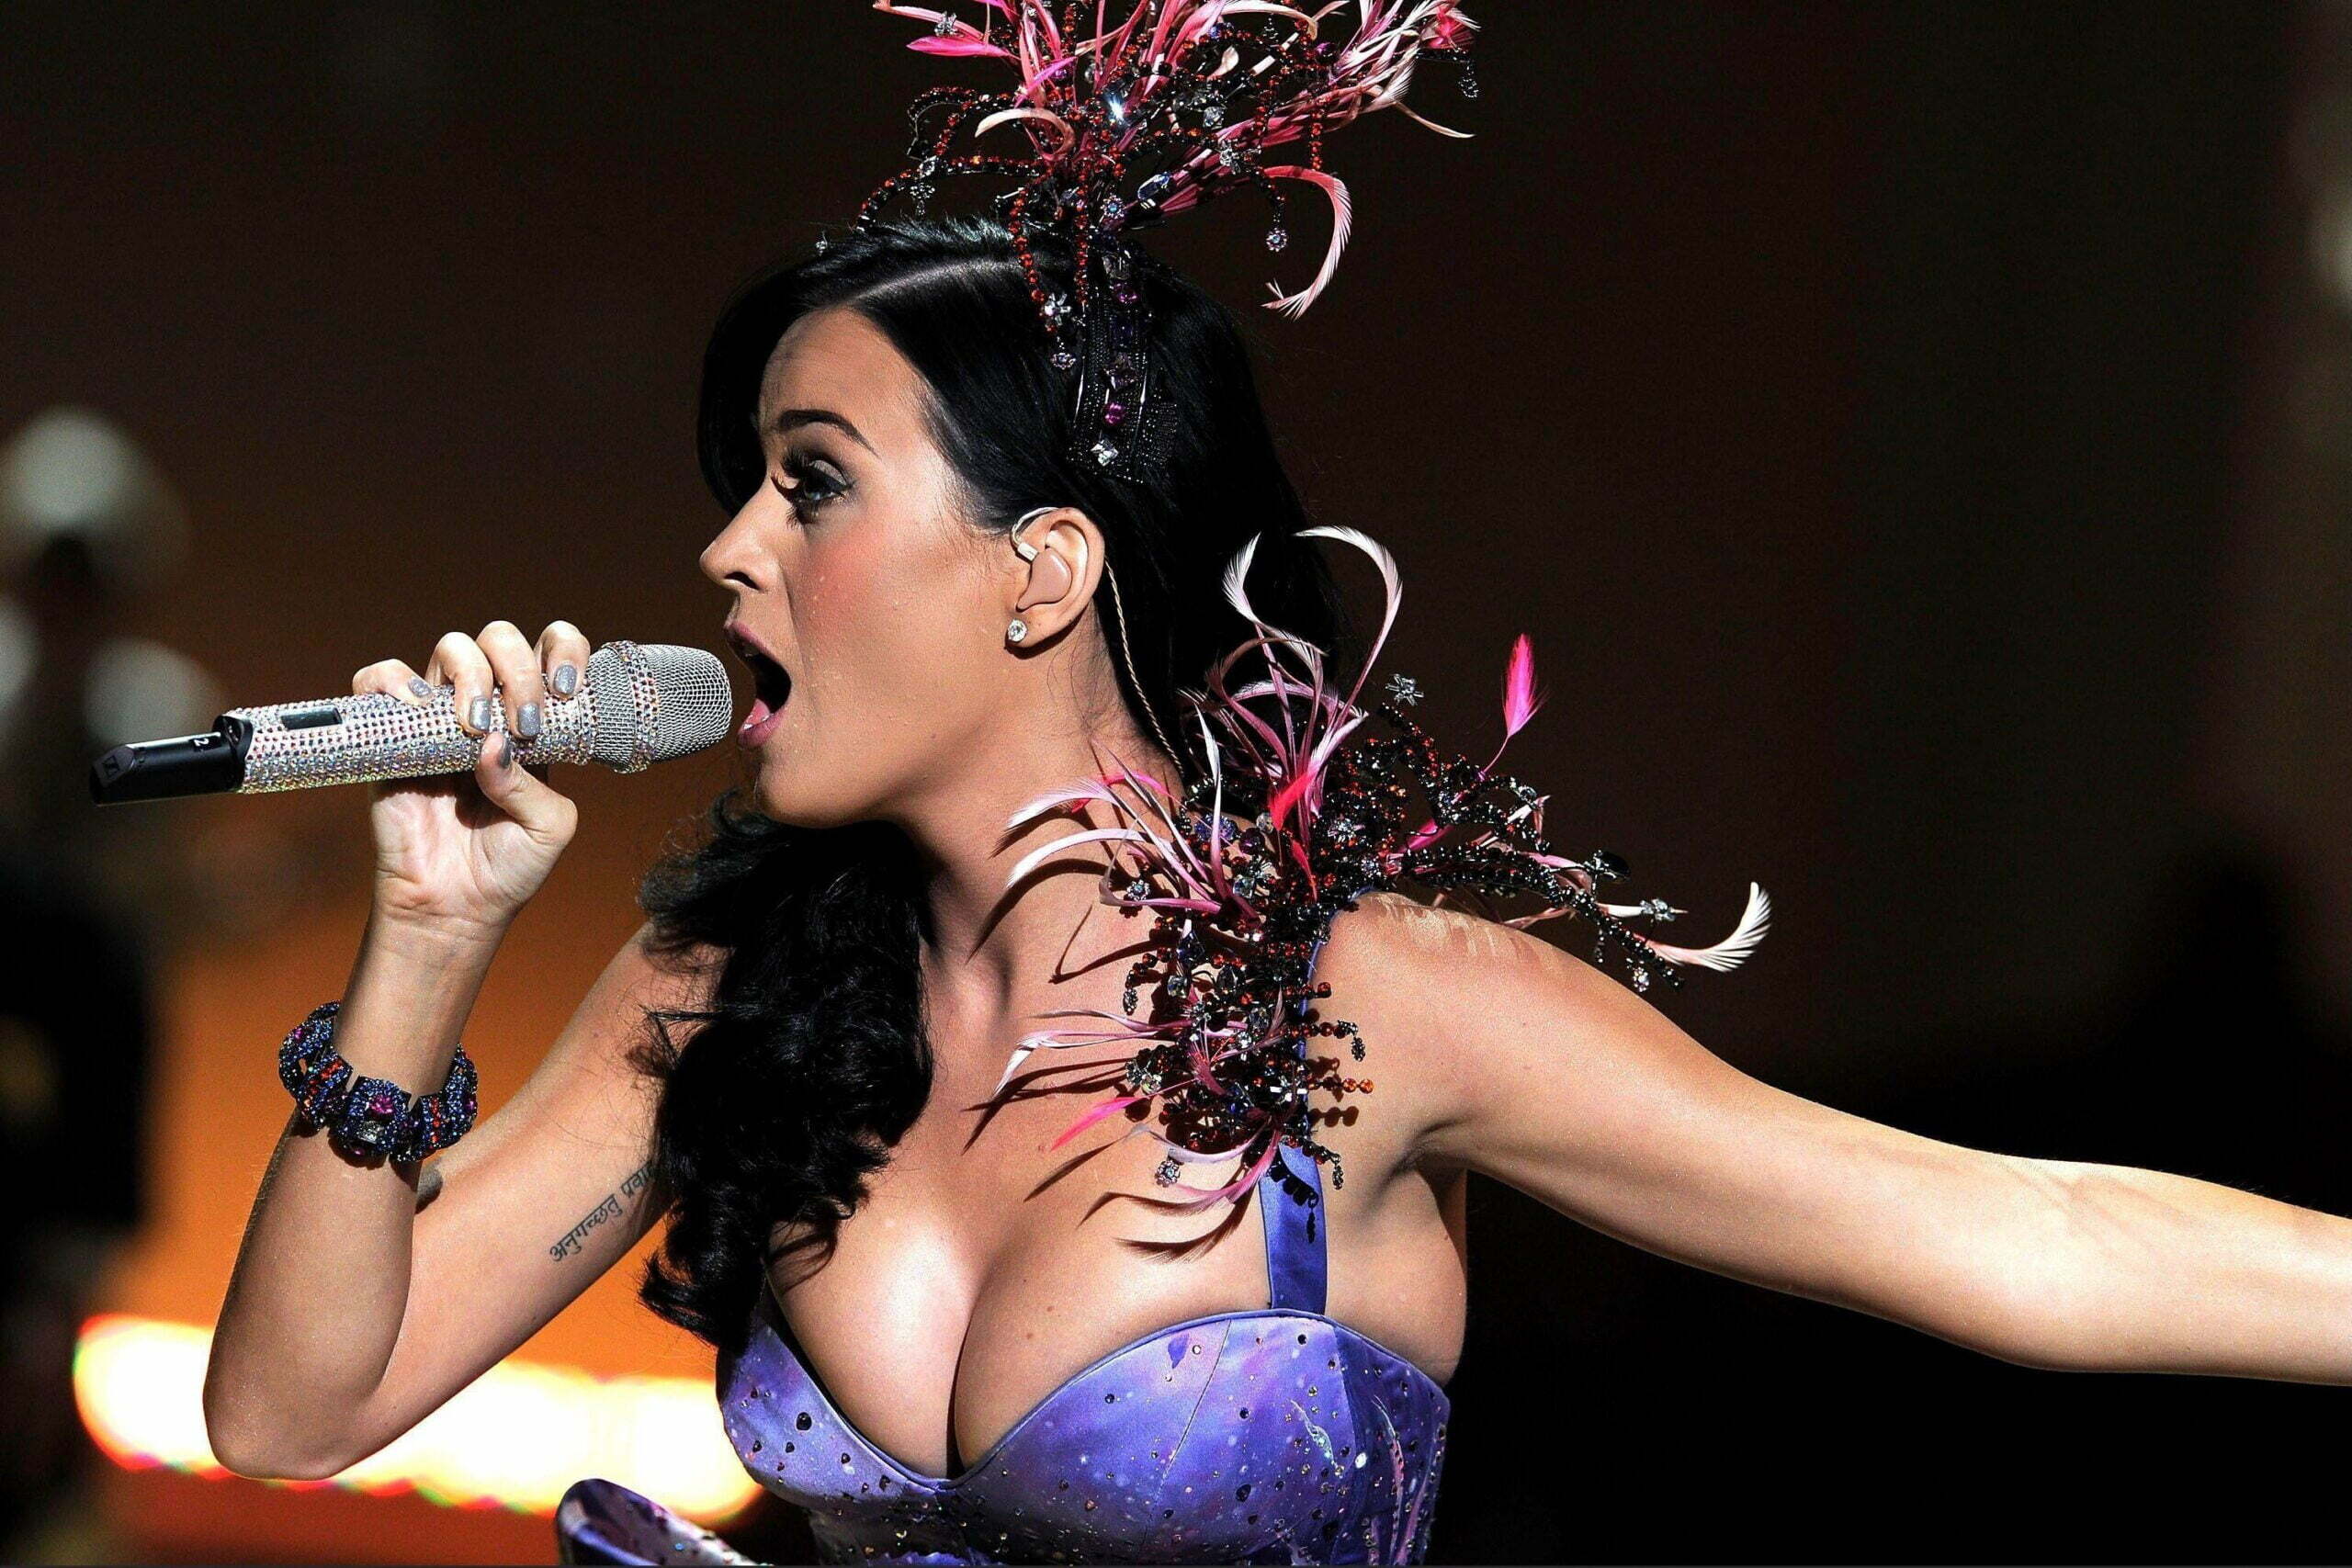 Katy Perrys overflowing Cleavage is a sight to behold